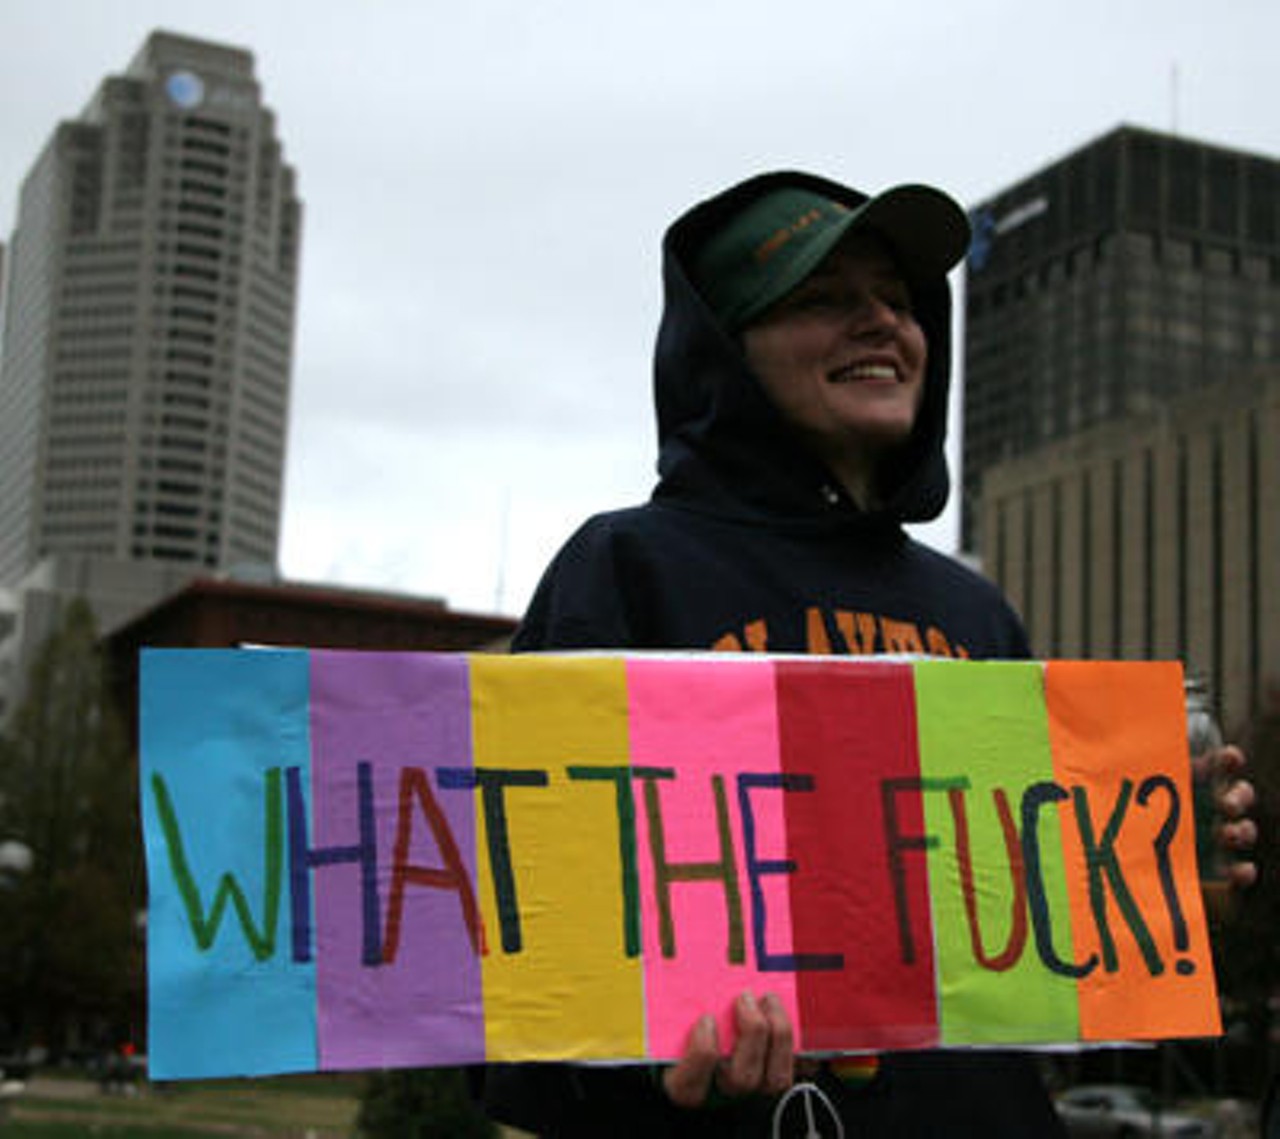 On November 15 in St. Louis, hundreds gathered at the Old Courthouse to protest Proposition 8, the California ballot measure that bans same-sex marriage. Here's a more blunt sentiment about the ban. More Protest Photos.